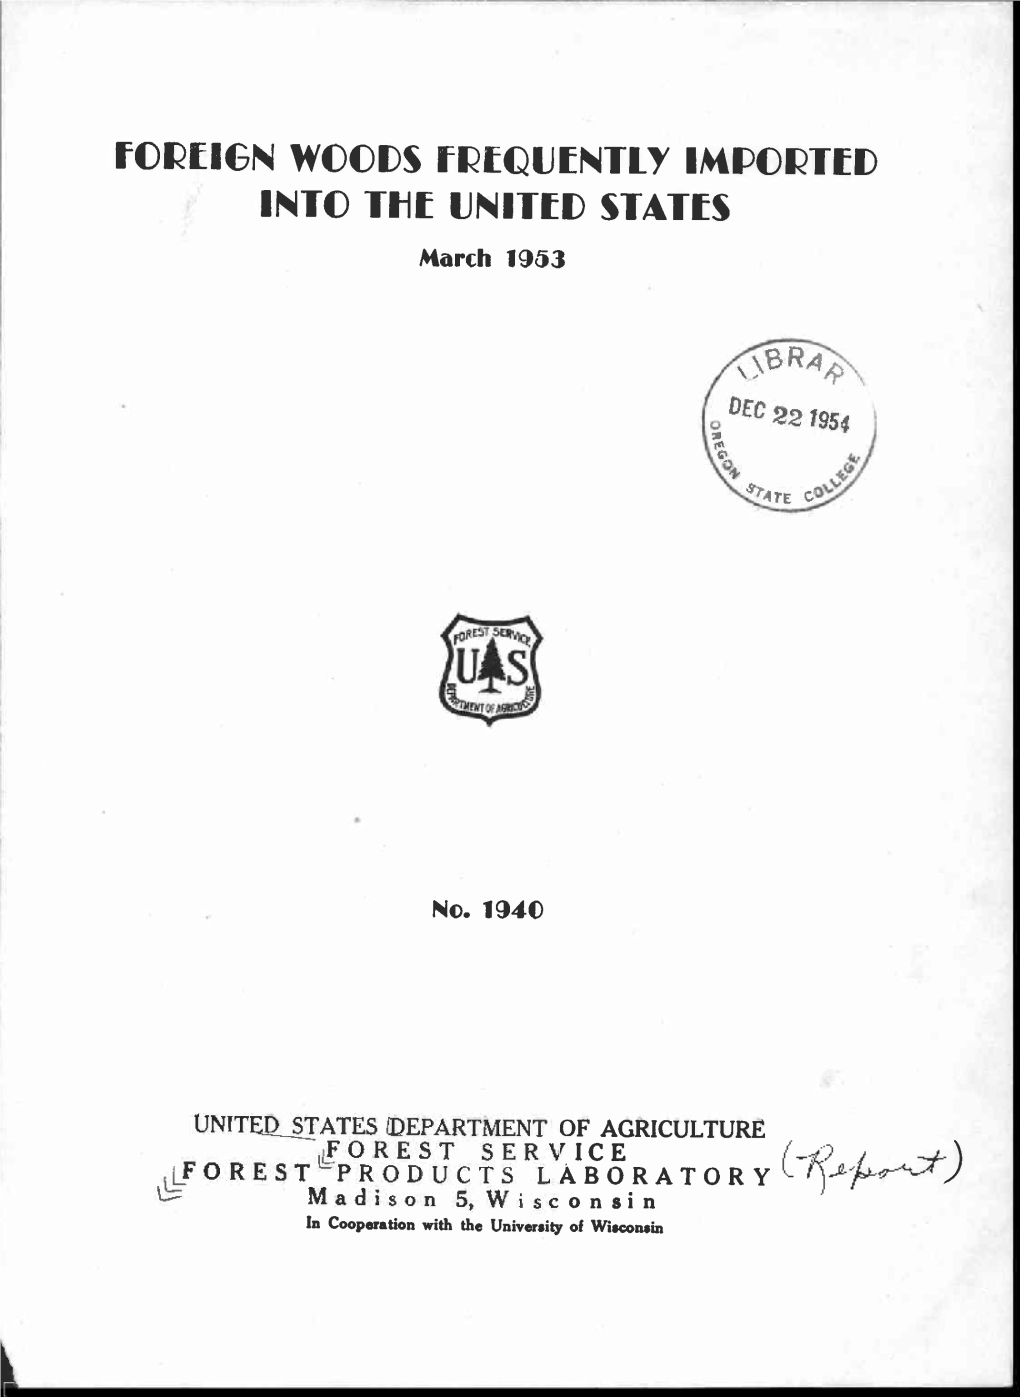 FOREIGN WOODS FREQUENTLY IMPORTED INTO Tilt UNITED STATES March 1953